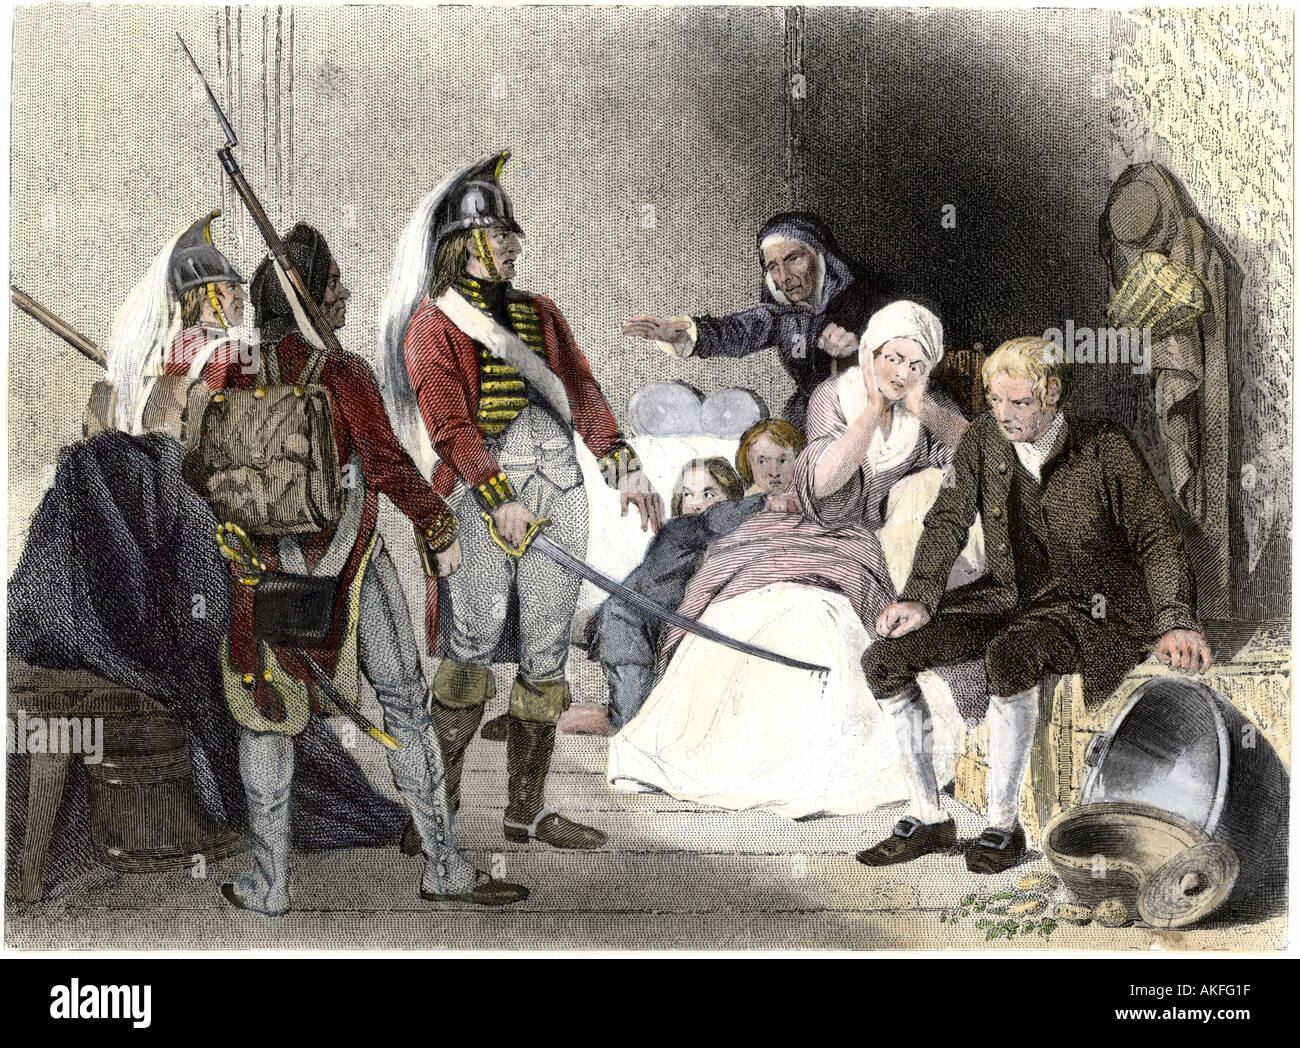 British soldiers quartered in an American colonial home 1770s. Hand-colored engraving Stock Photo